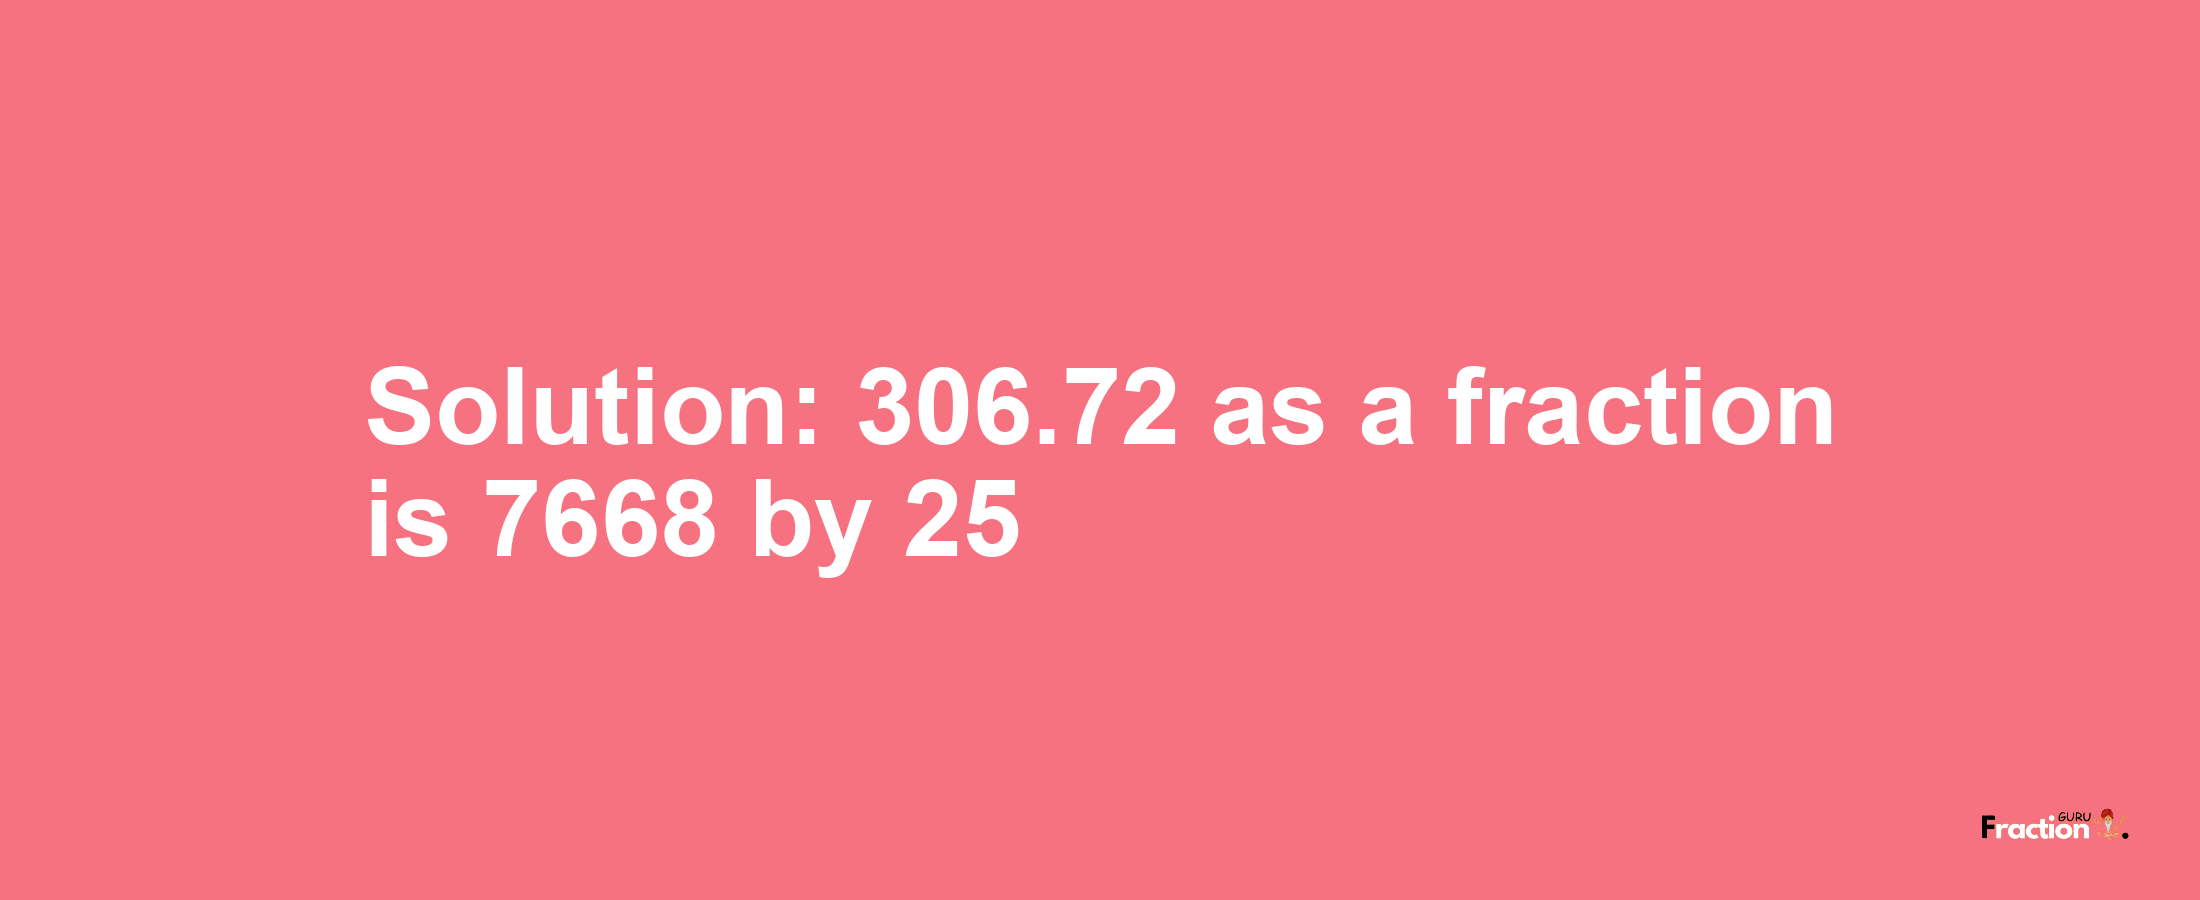 Solution:306.72 as a fraction is 7668/25